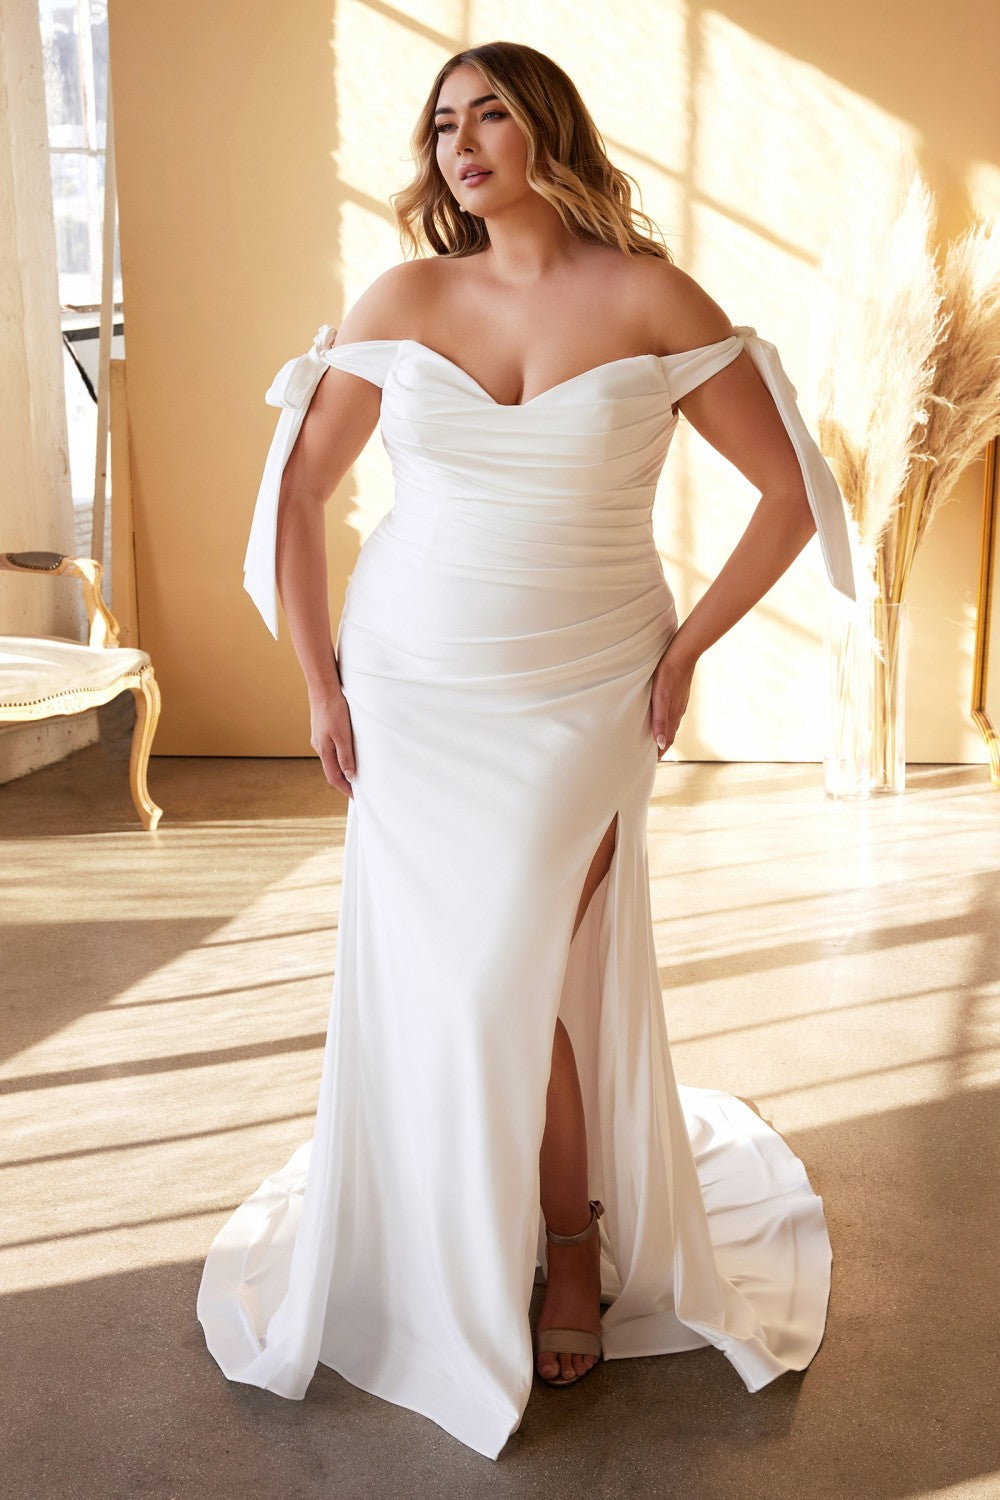 Plus Size Fitted Wedding Gown Off Shoulders Cowl Neckline Bodice with Tied Straps Stretch Satin Bridal Dress with Leg Slit CDCD944WC Elsy Style Wedding Dress